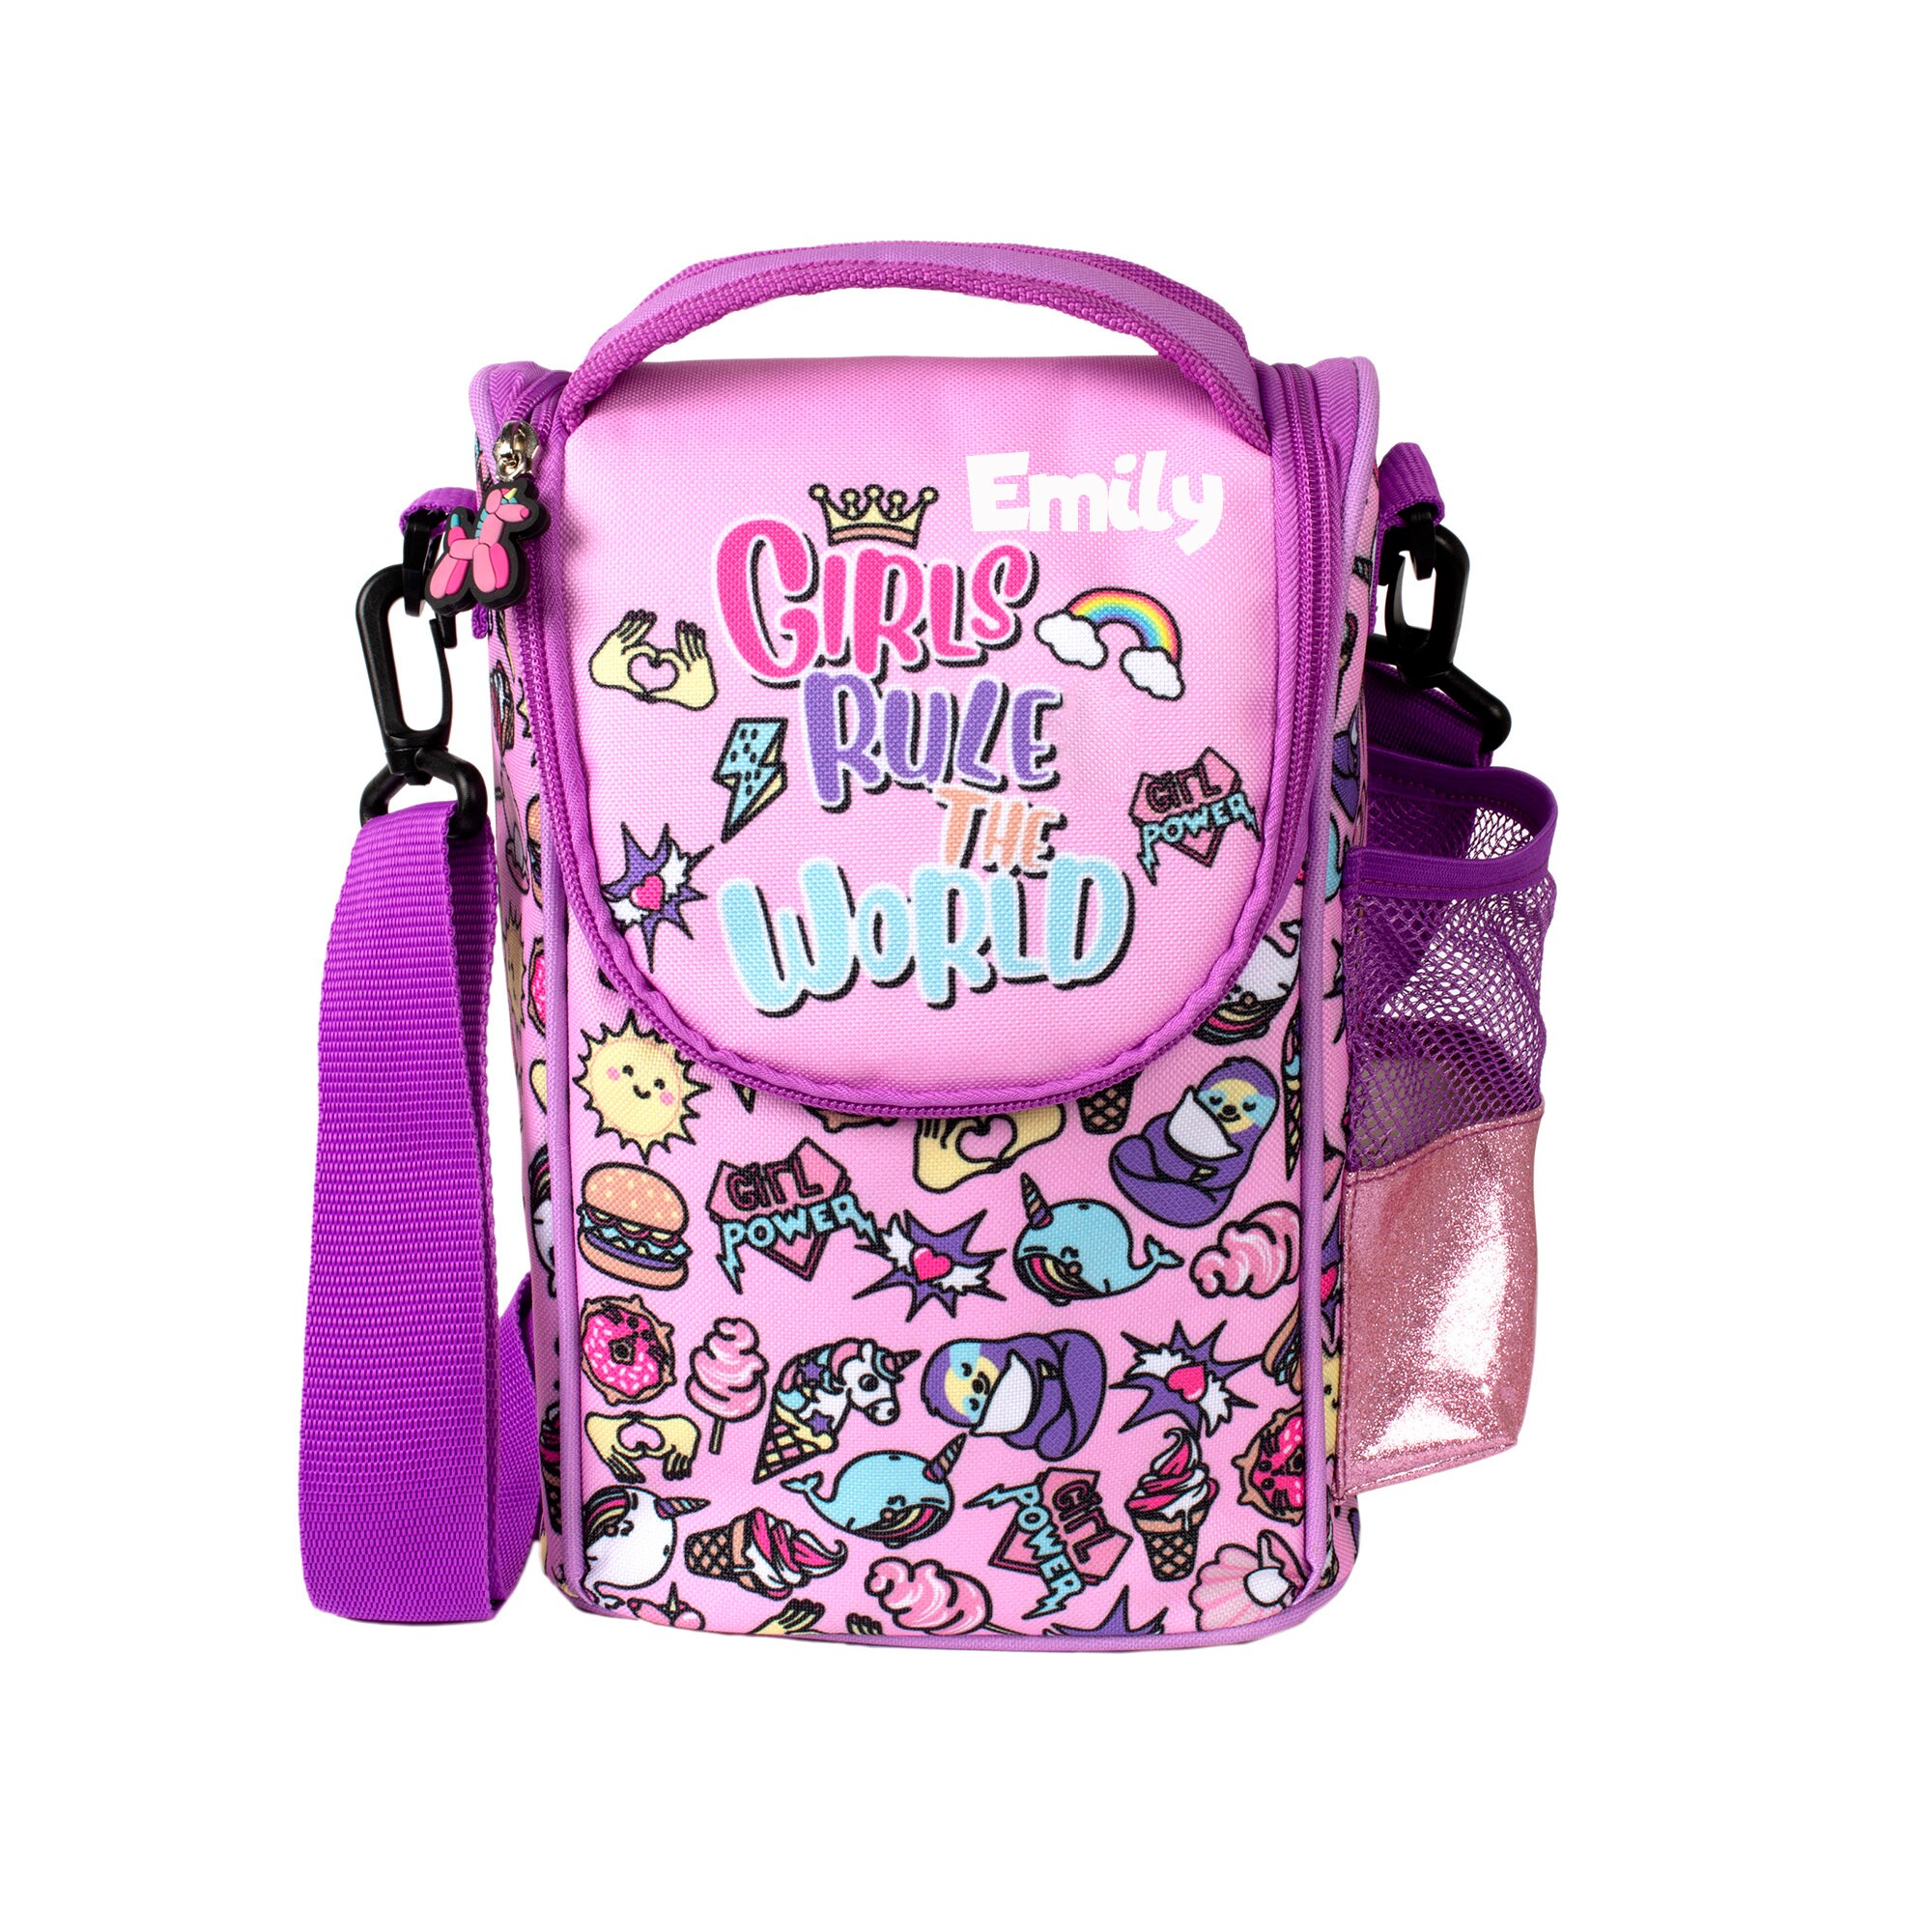 Fringoo Kids Personalised Lunch Bag Large Capacity Strap Thermal Lunch Box  for Girls & Boys School Packed Lunch Bag 